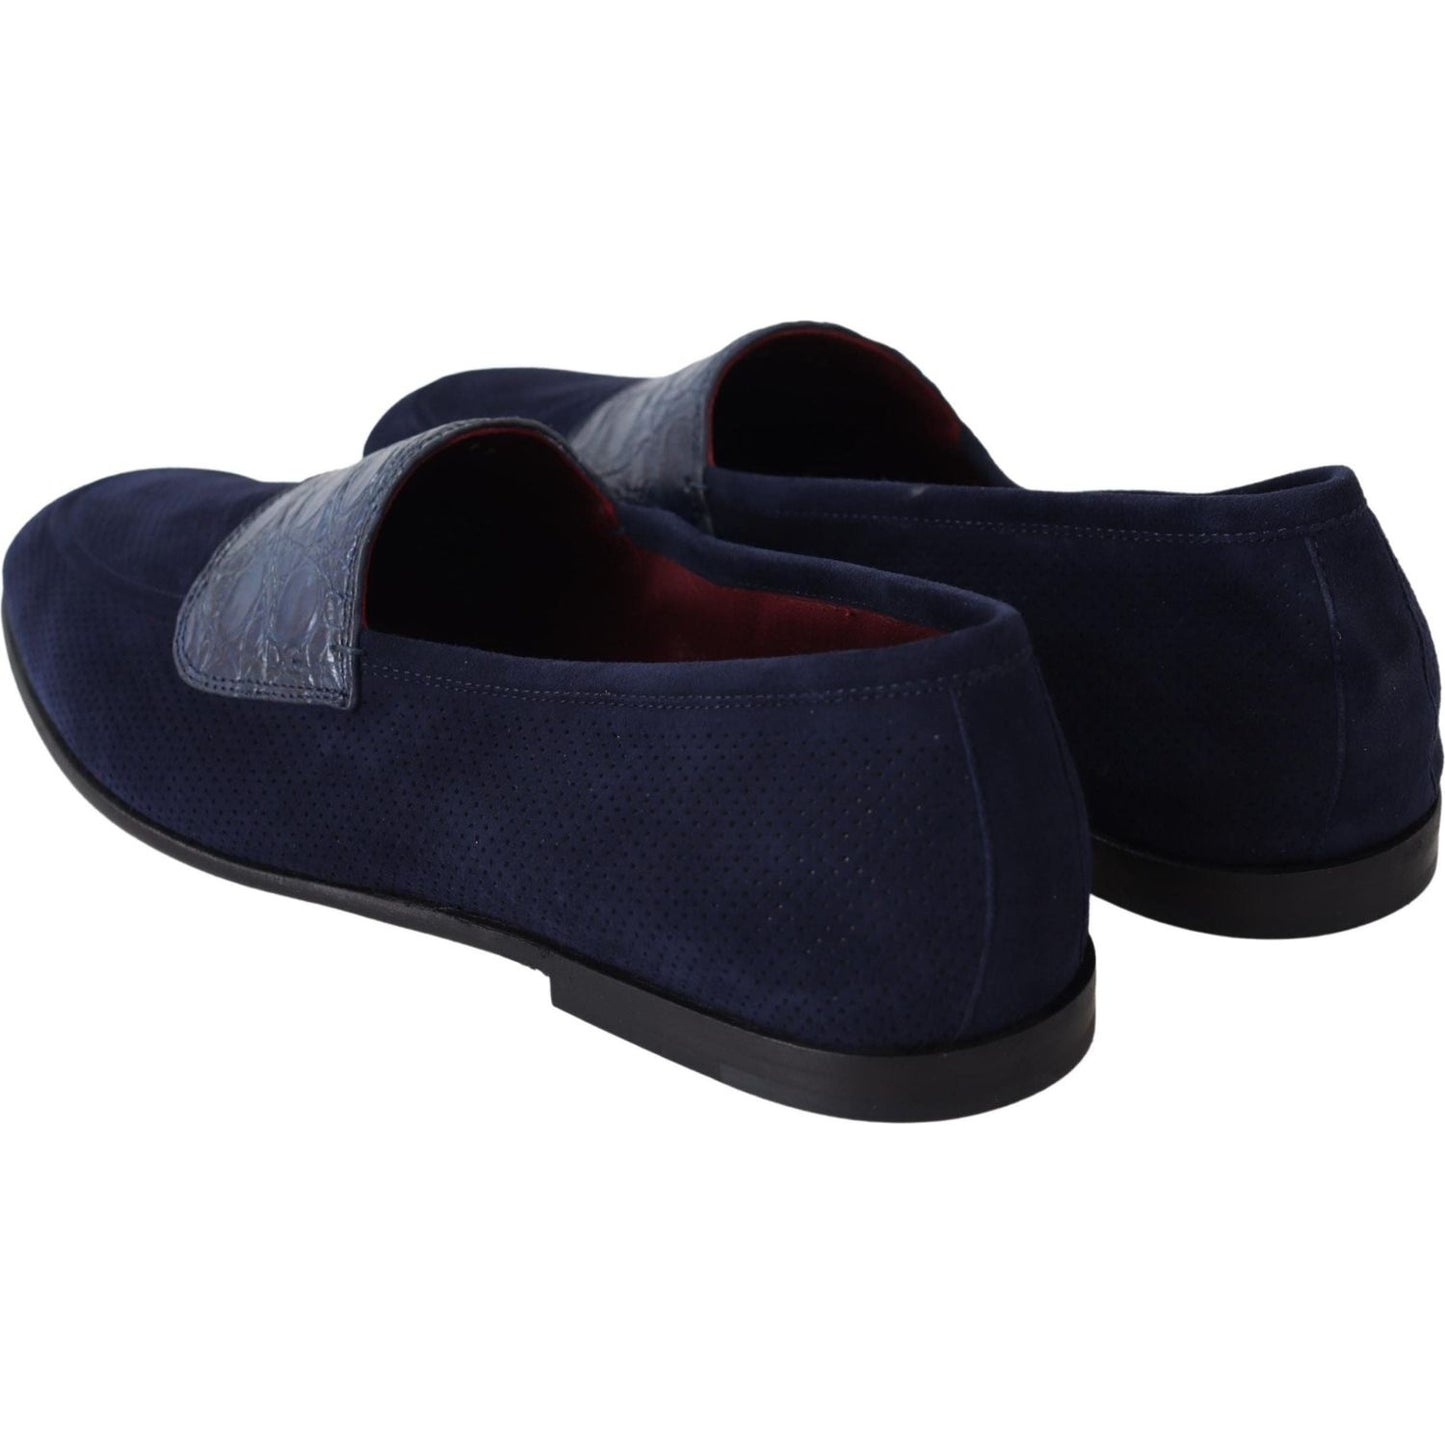 Dolce & Gabbana Elegant Blue Suede Leather Loafers blue-suede-caiman-loafers-slippers-shoes